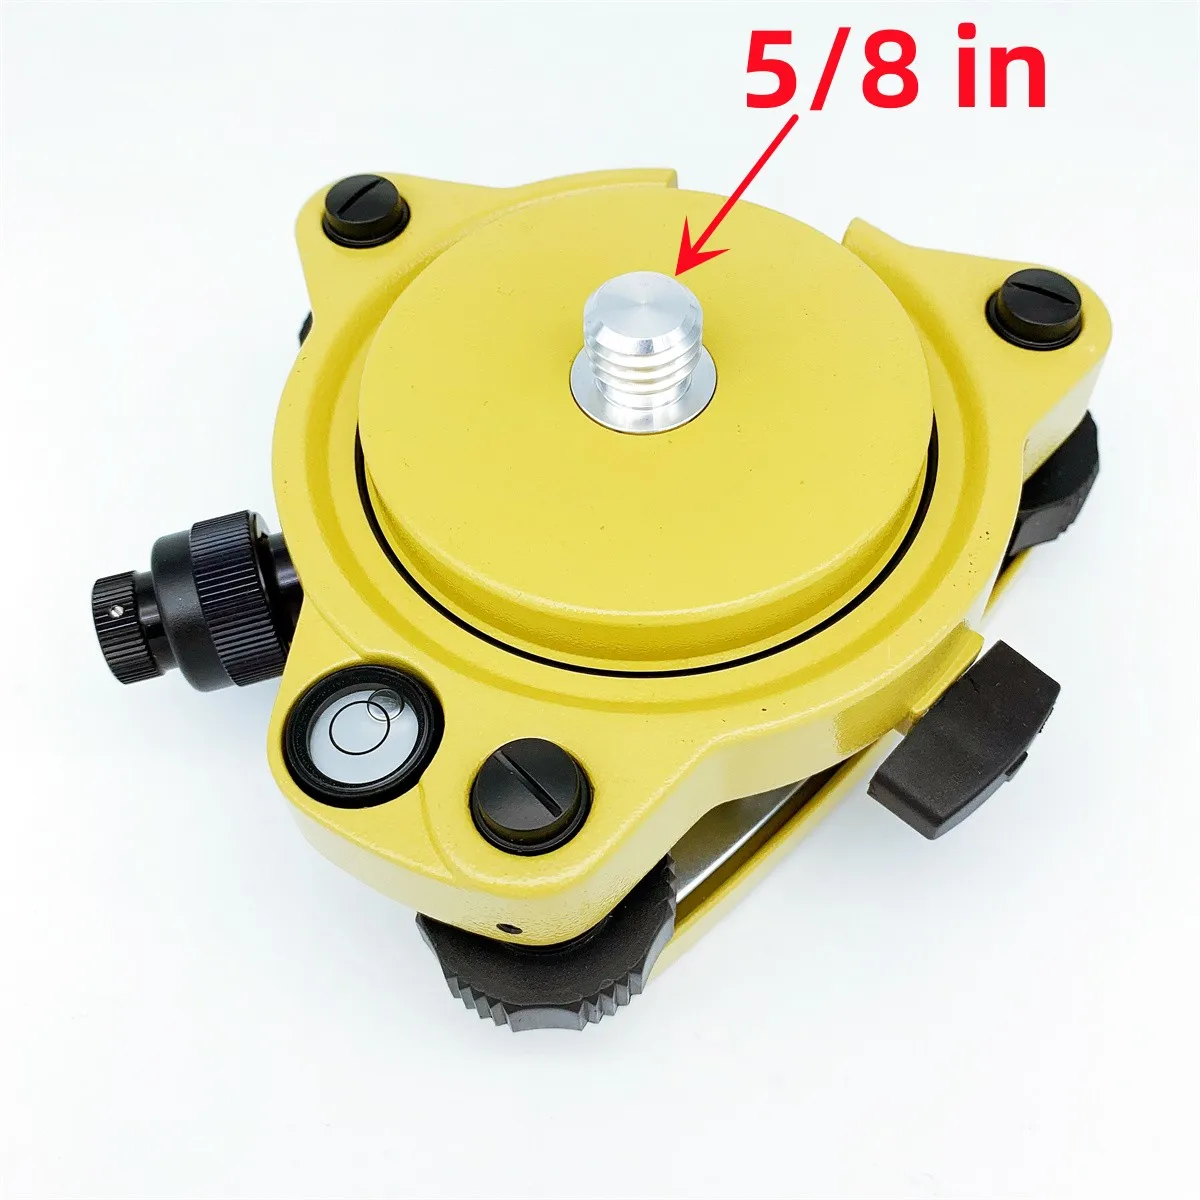 

Yellow Tribrach With Optical Plummet & GPS Tribrach Adapter Carrier With 5/8"x11 Mount Rotate Screw For Total Station GPS GNSS